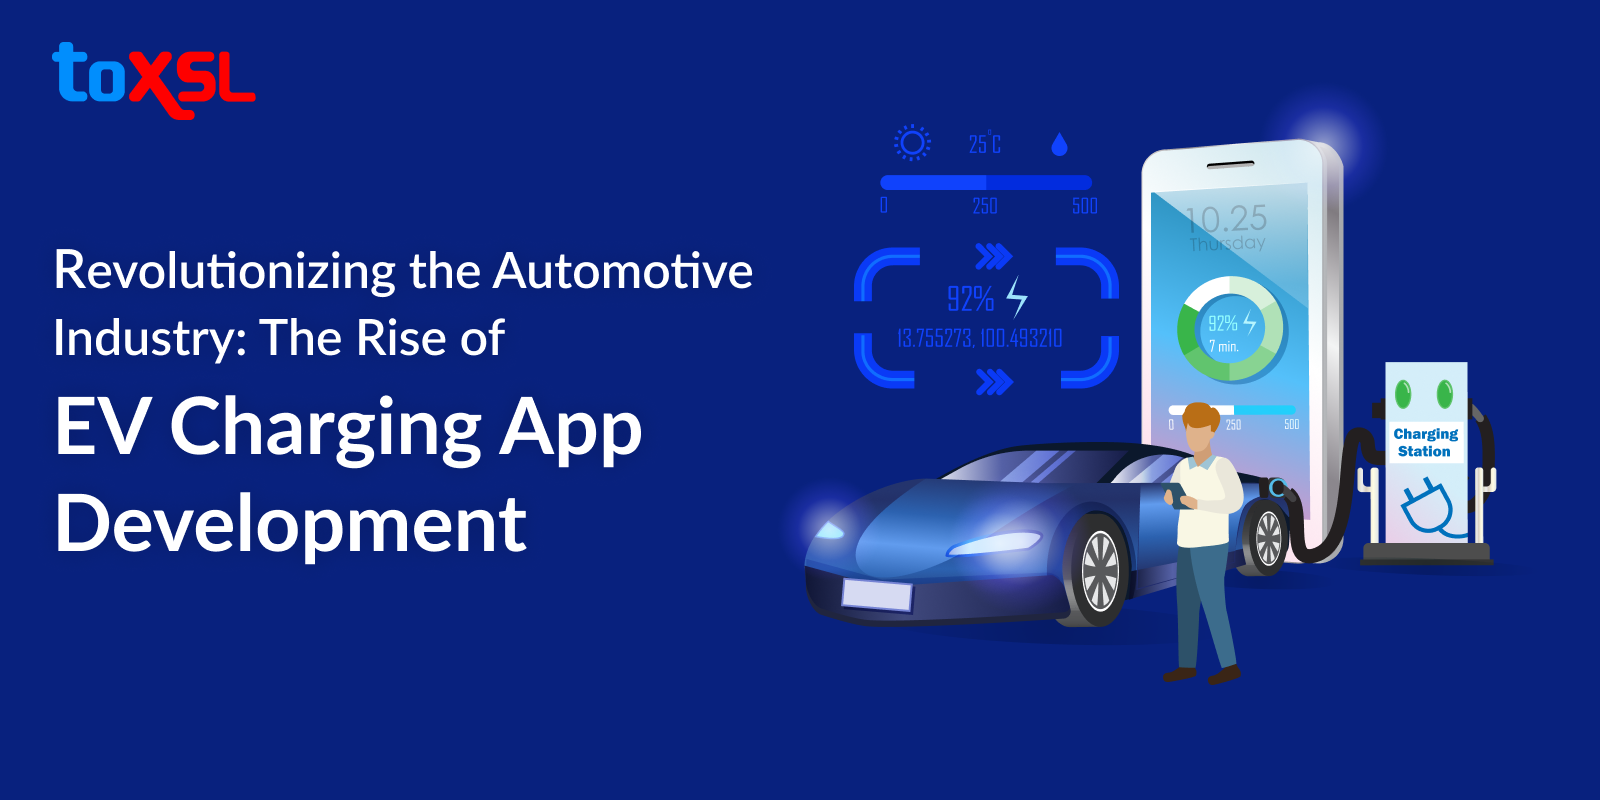 Revolutionizing the Automotive Industry: The Rise of EV Charging App Development